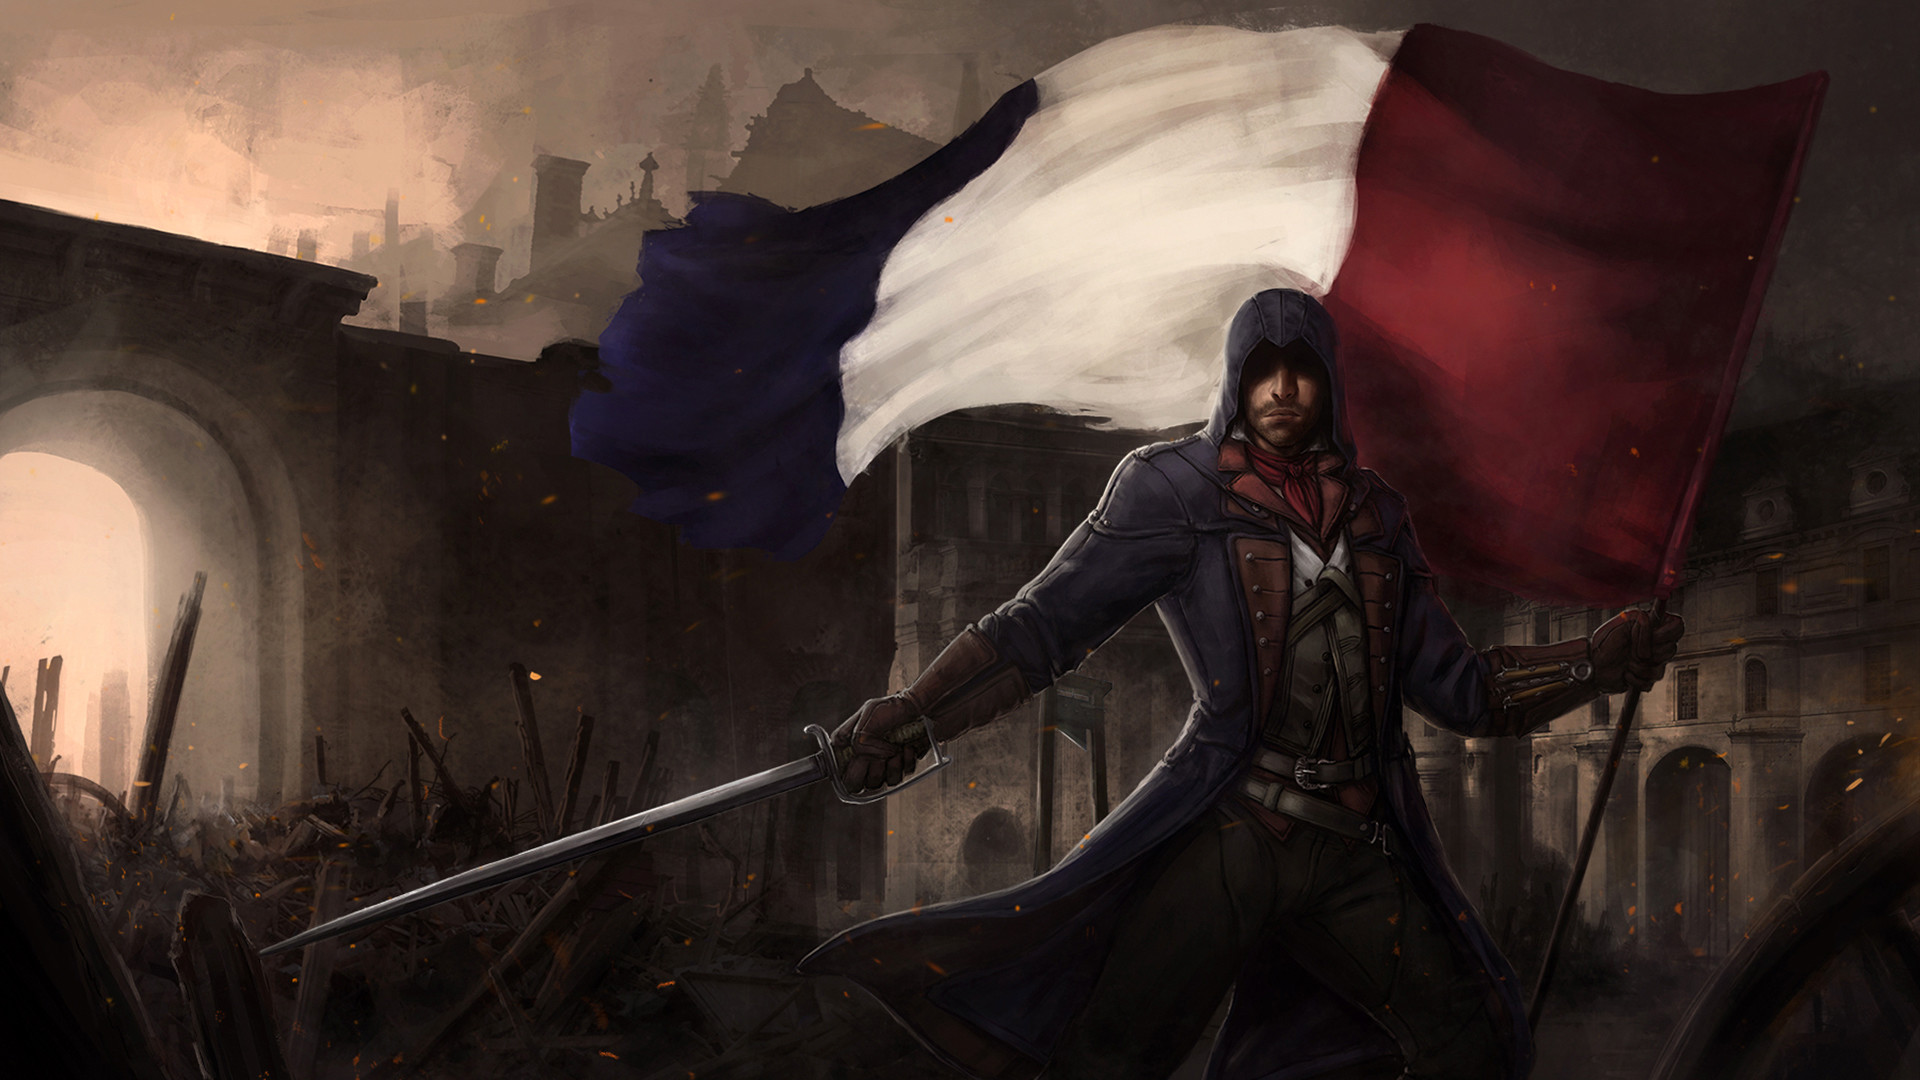 assassin's creed unity wallpaper hd,action adventure game,cg artwork,adventure game,illustration,pc game